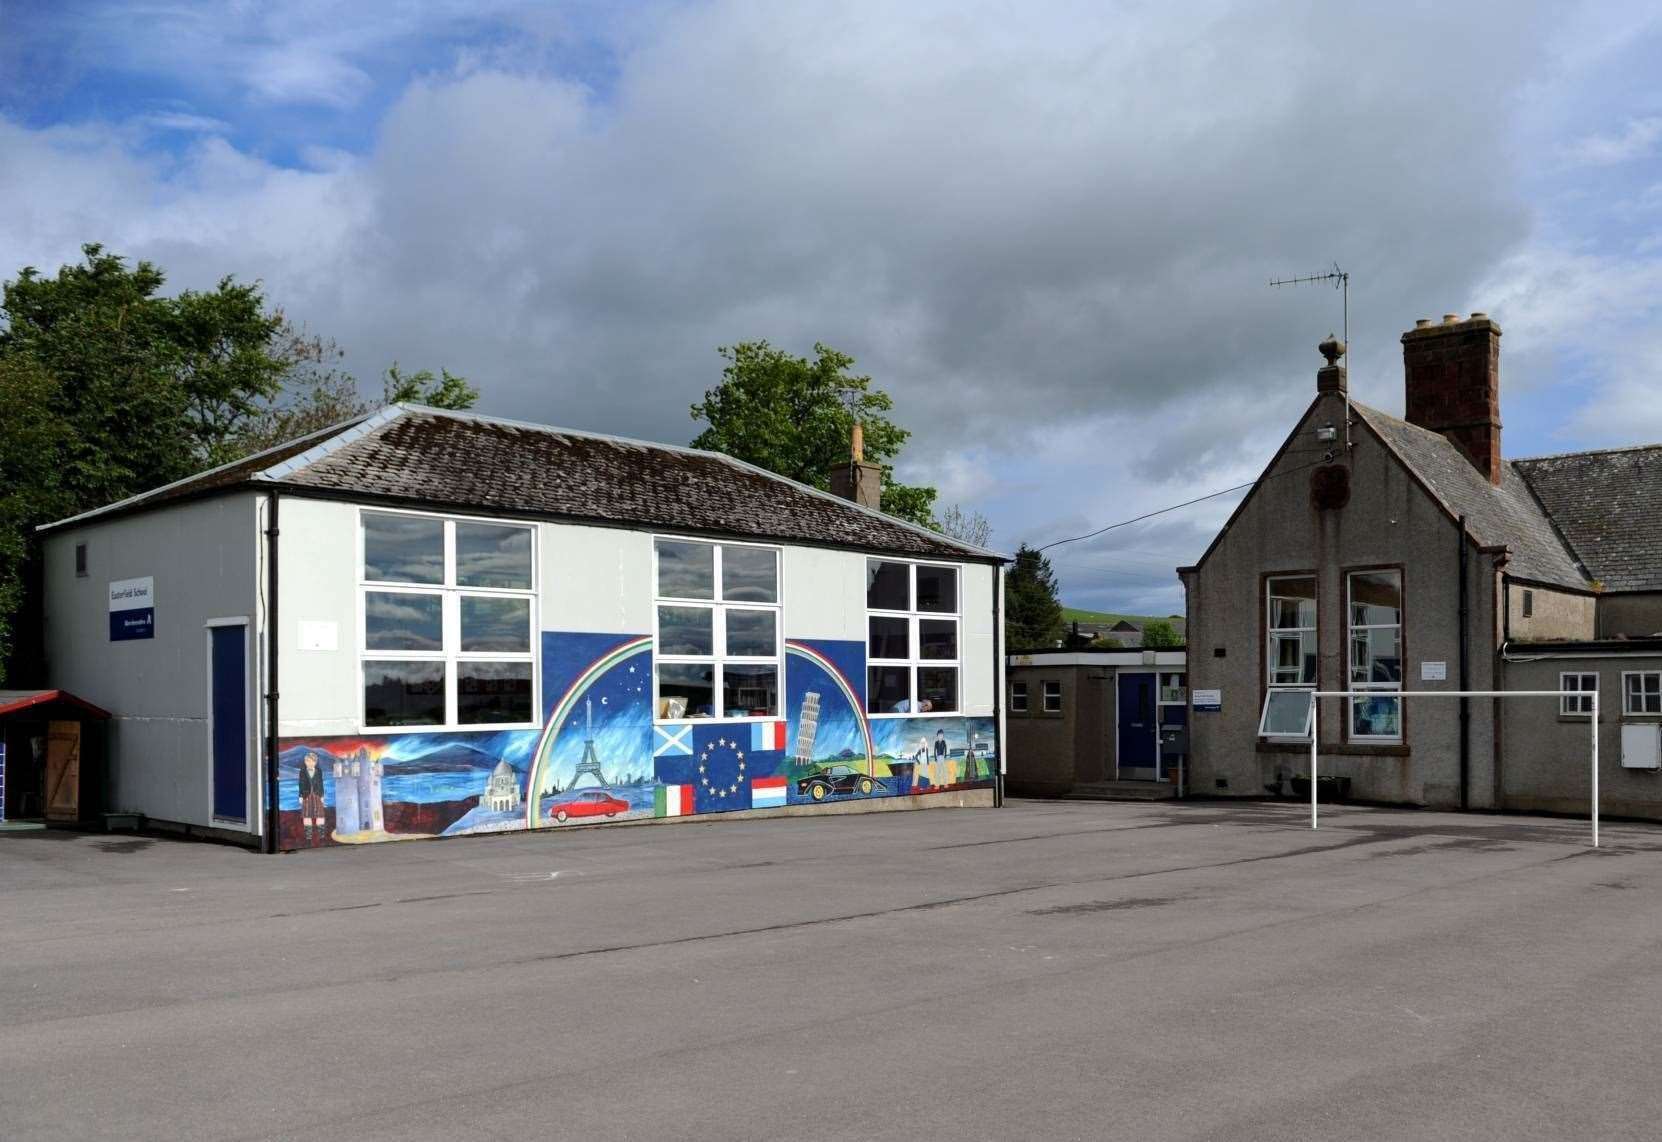 Easterfield Primary